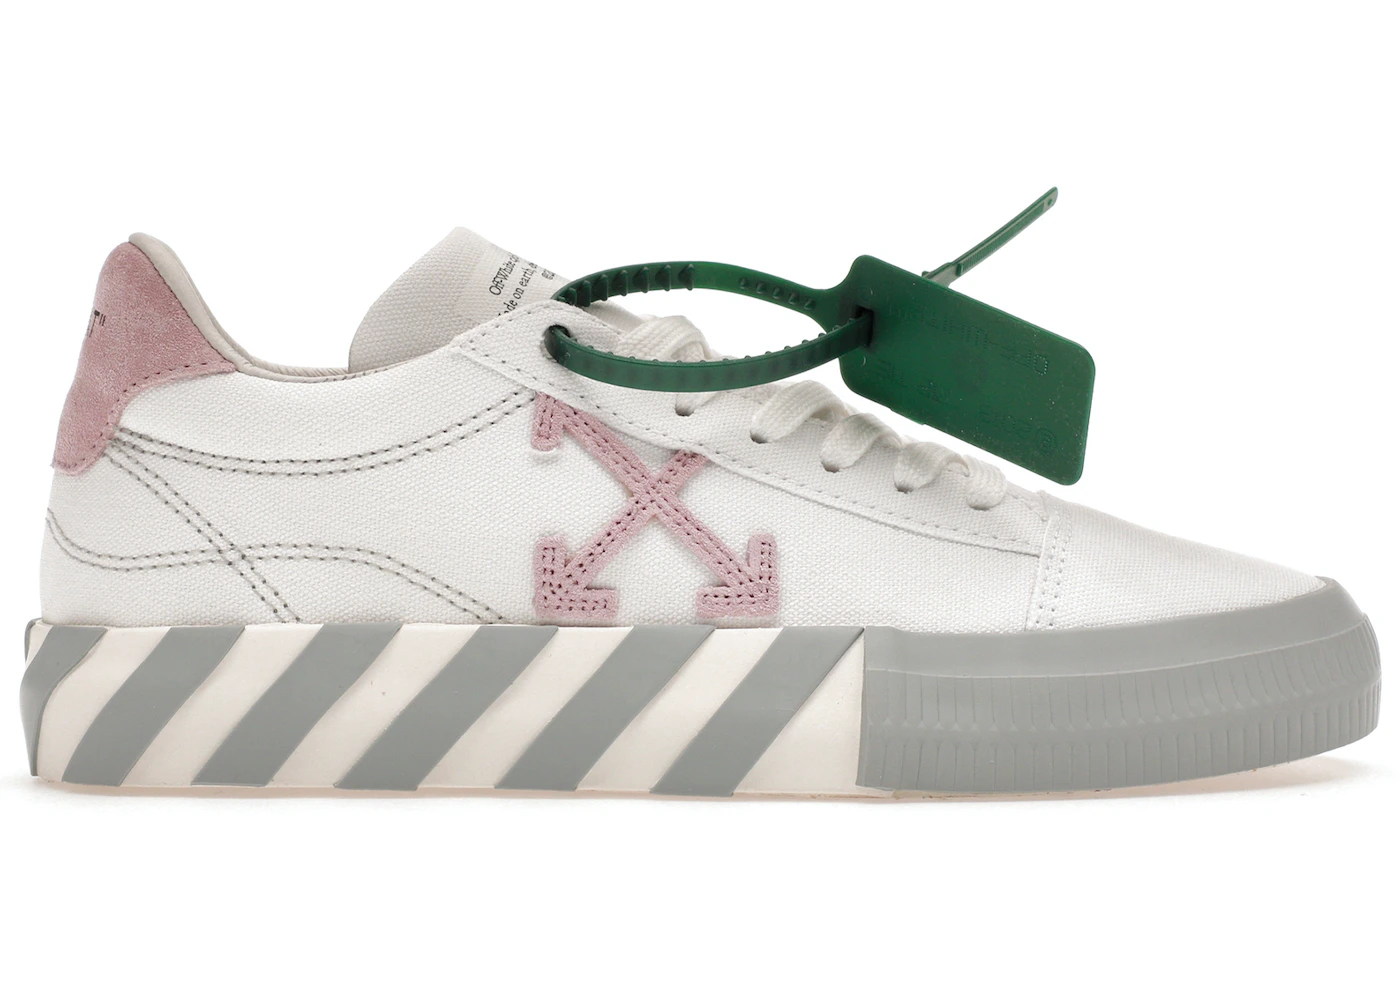 OFF-WHITE Vulc Low Canvas White Light Pink Grey - OWIA178S22FAB0010130 - US